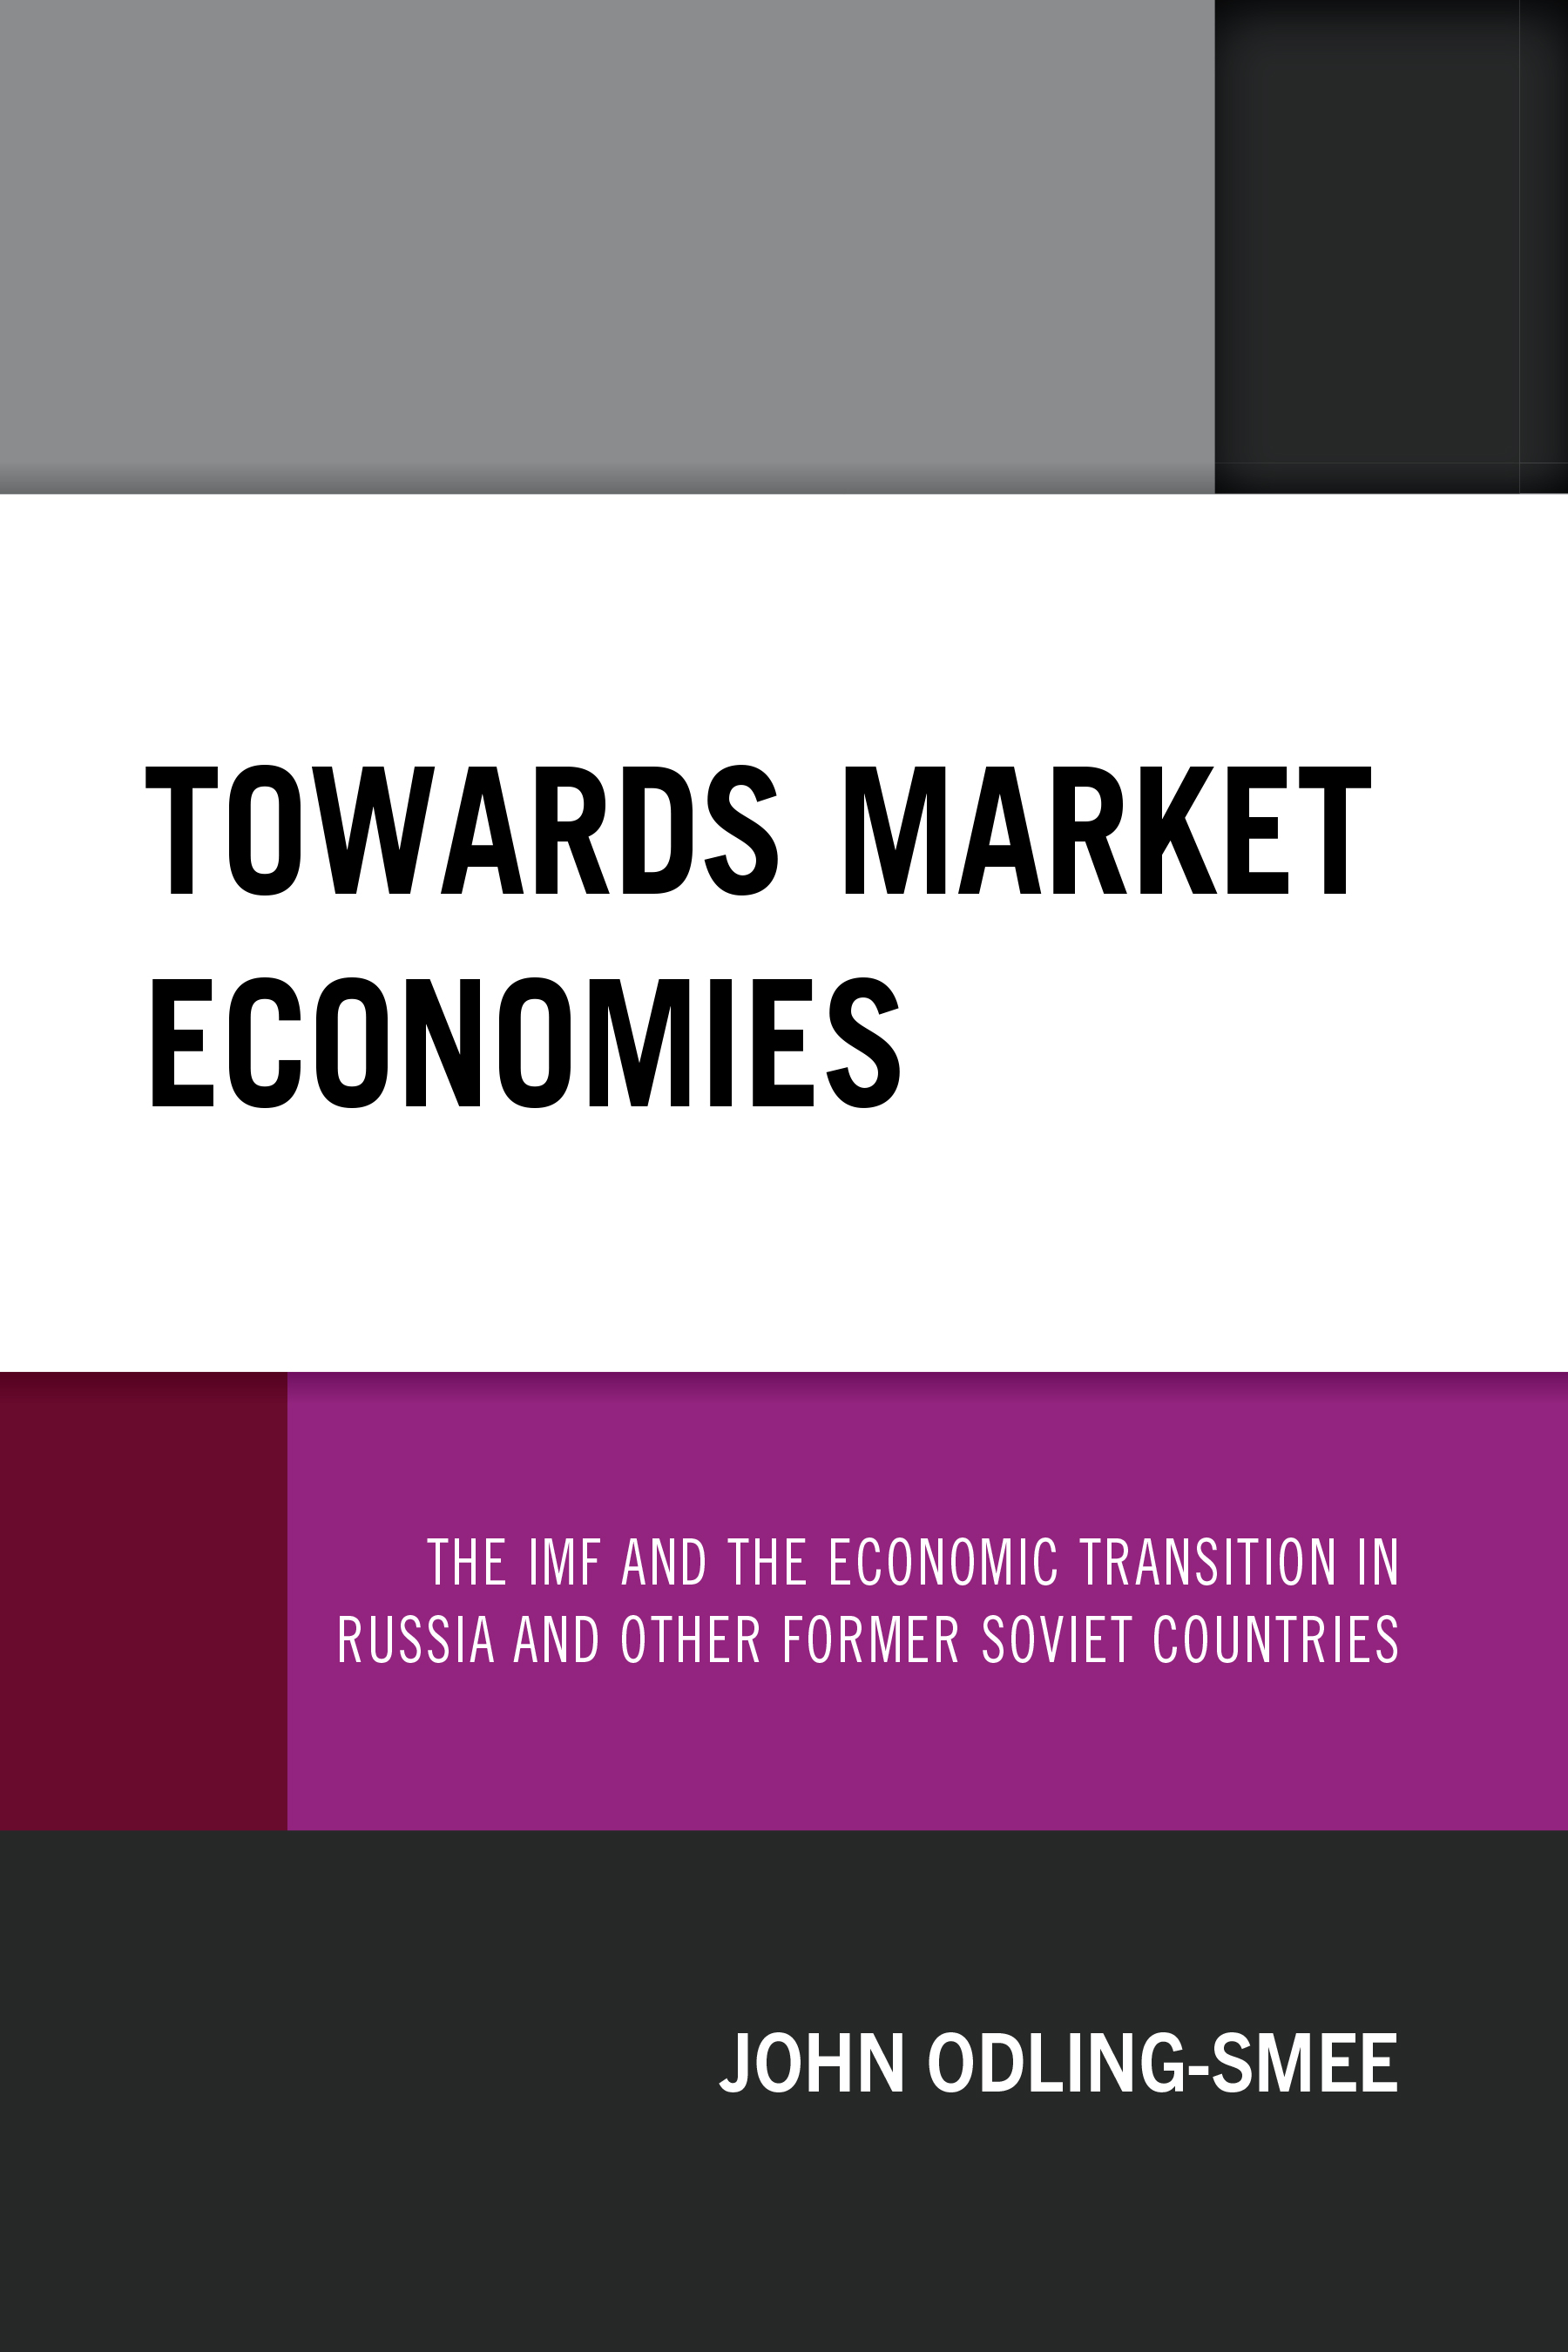 Towards Market Economies: The IMF and the Economic Transition in Russia and Other Former Soviet Countries